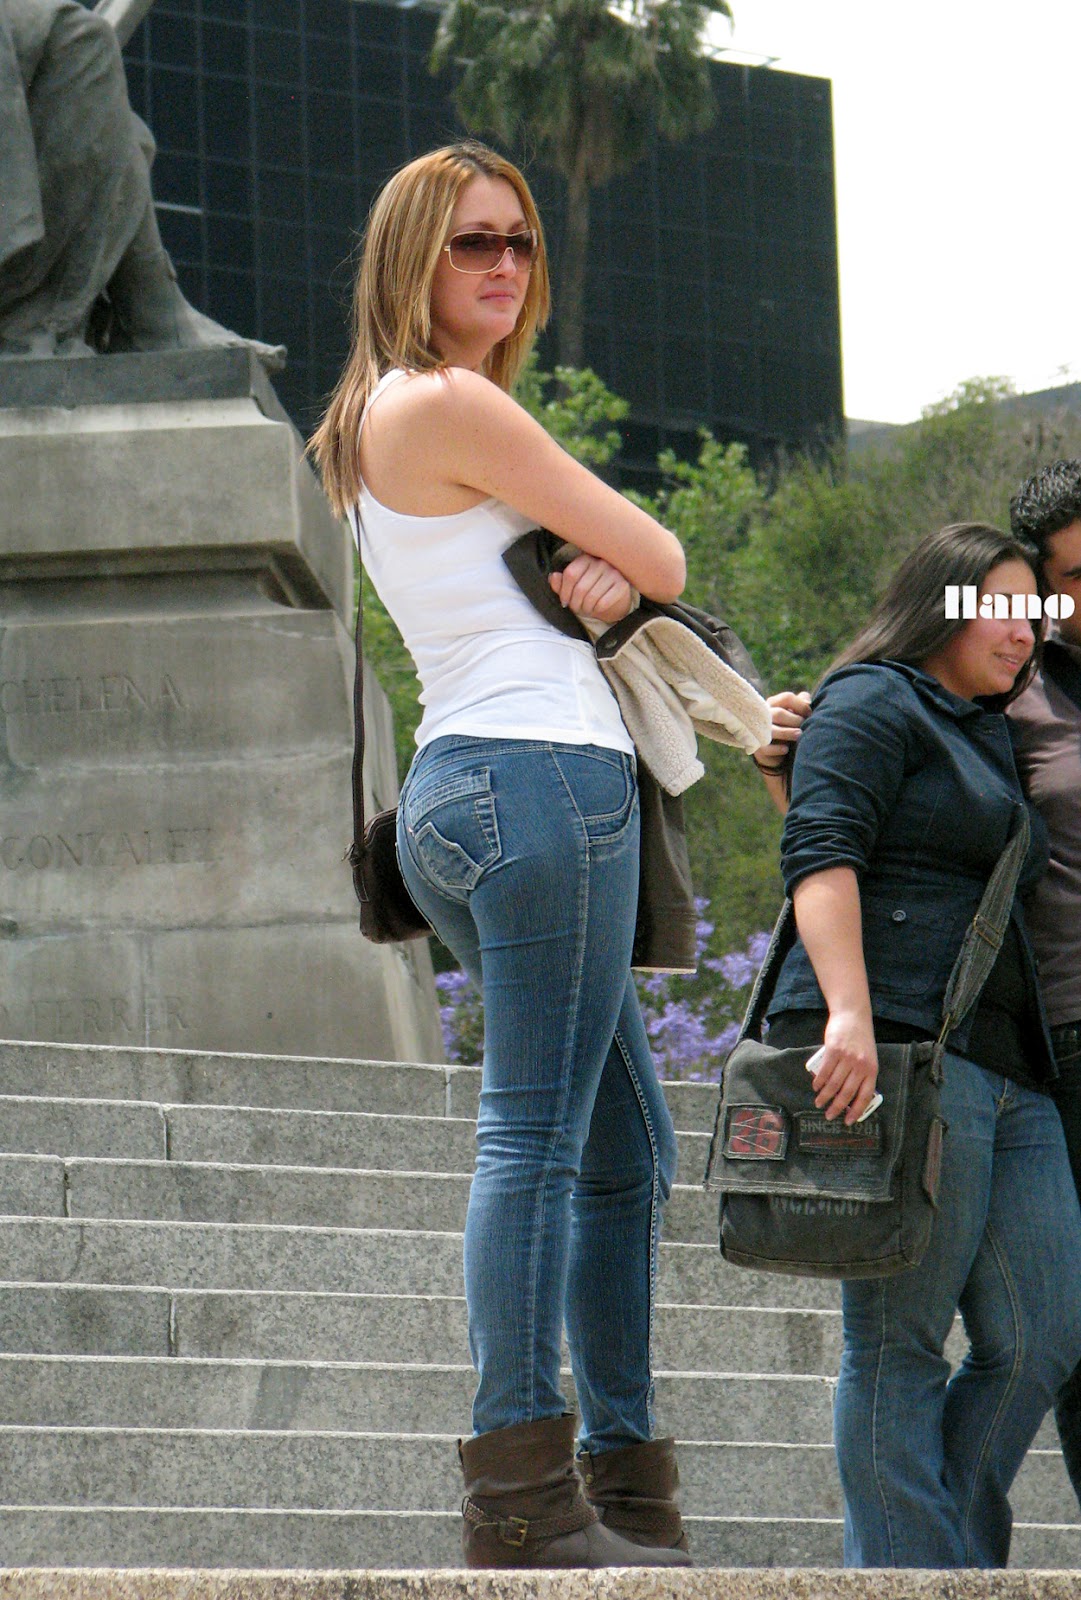 Beautiful Blonde With Tight Jeans Divine Butts Candid 21942 The Best